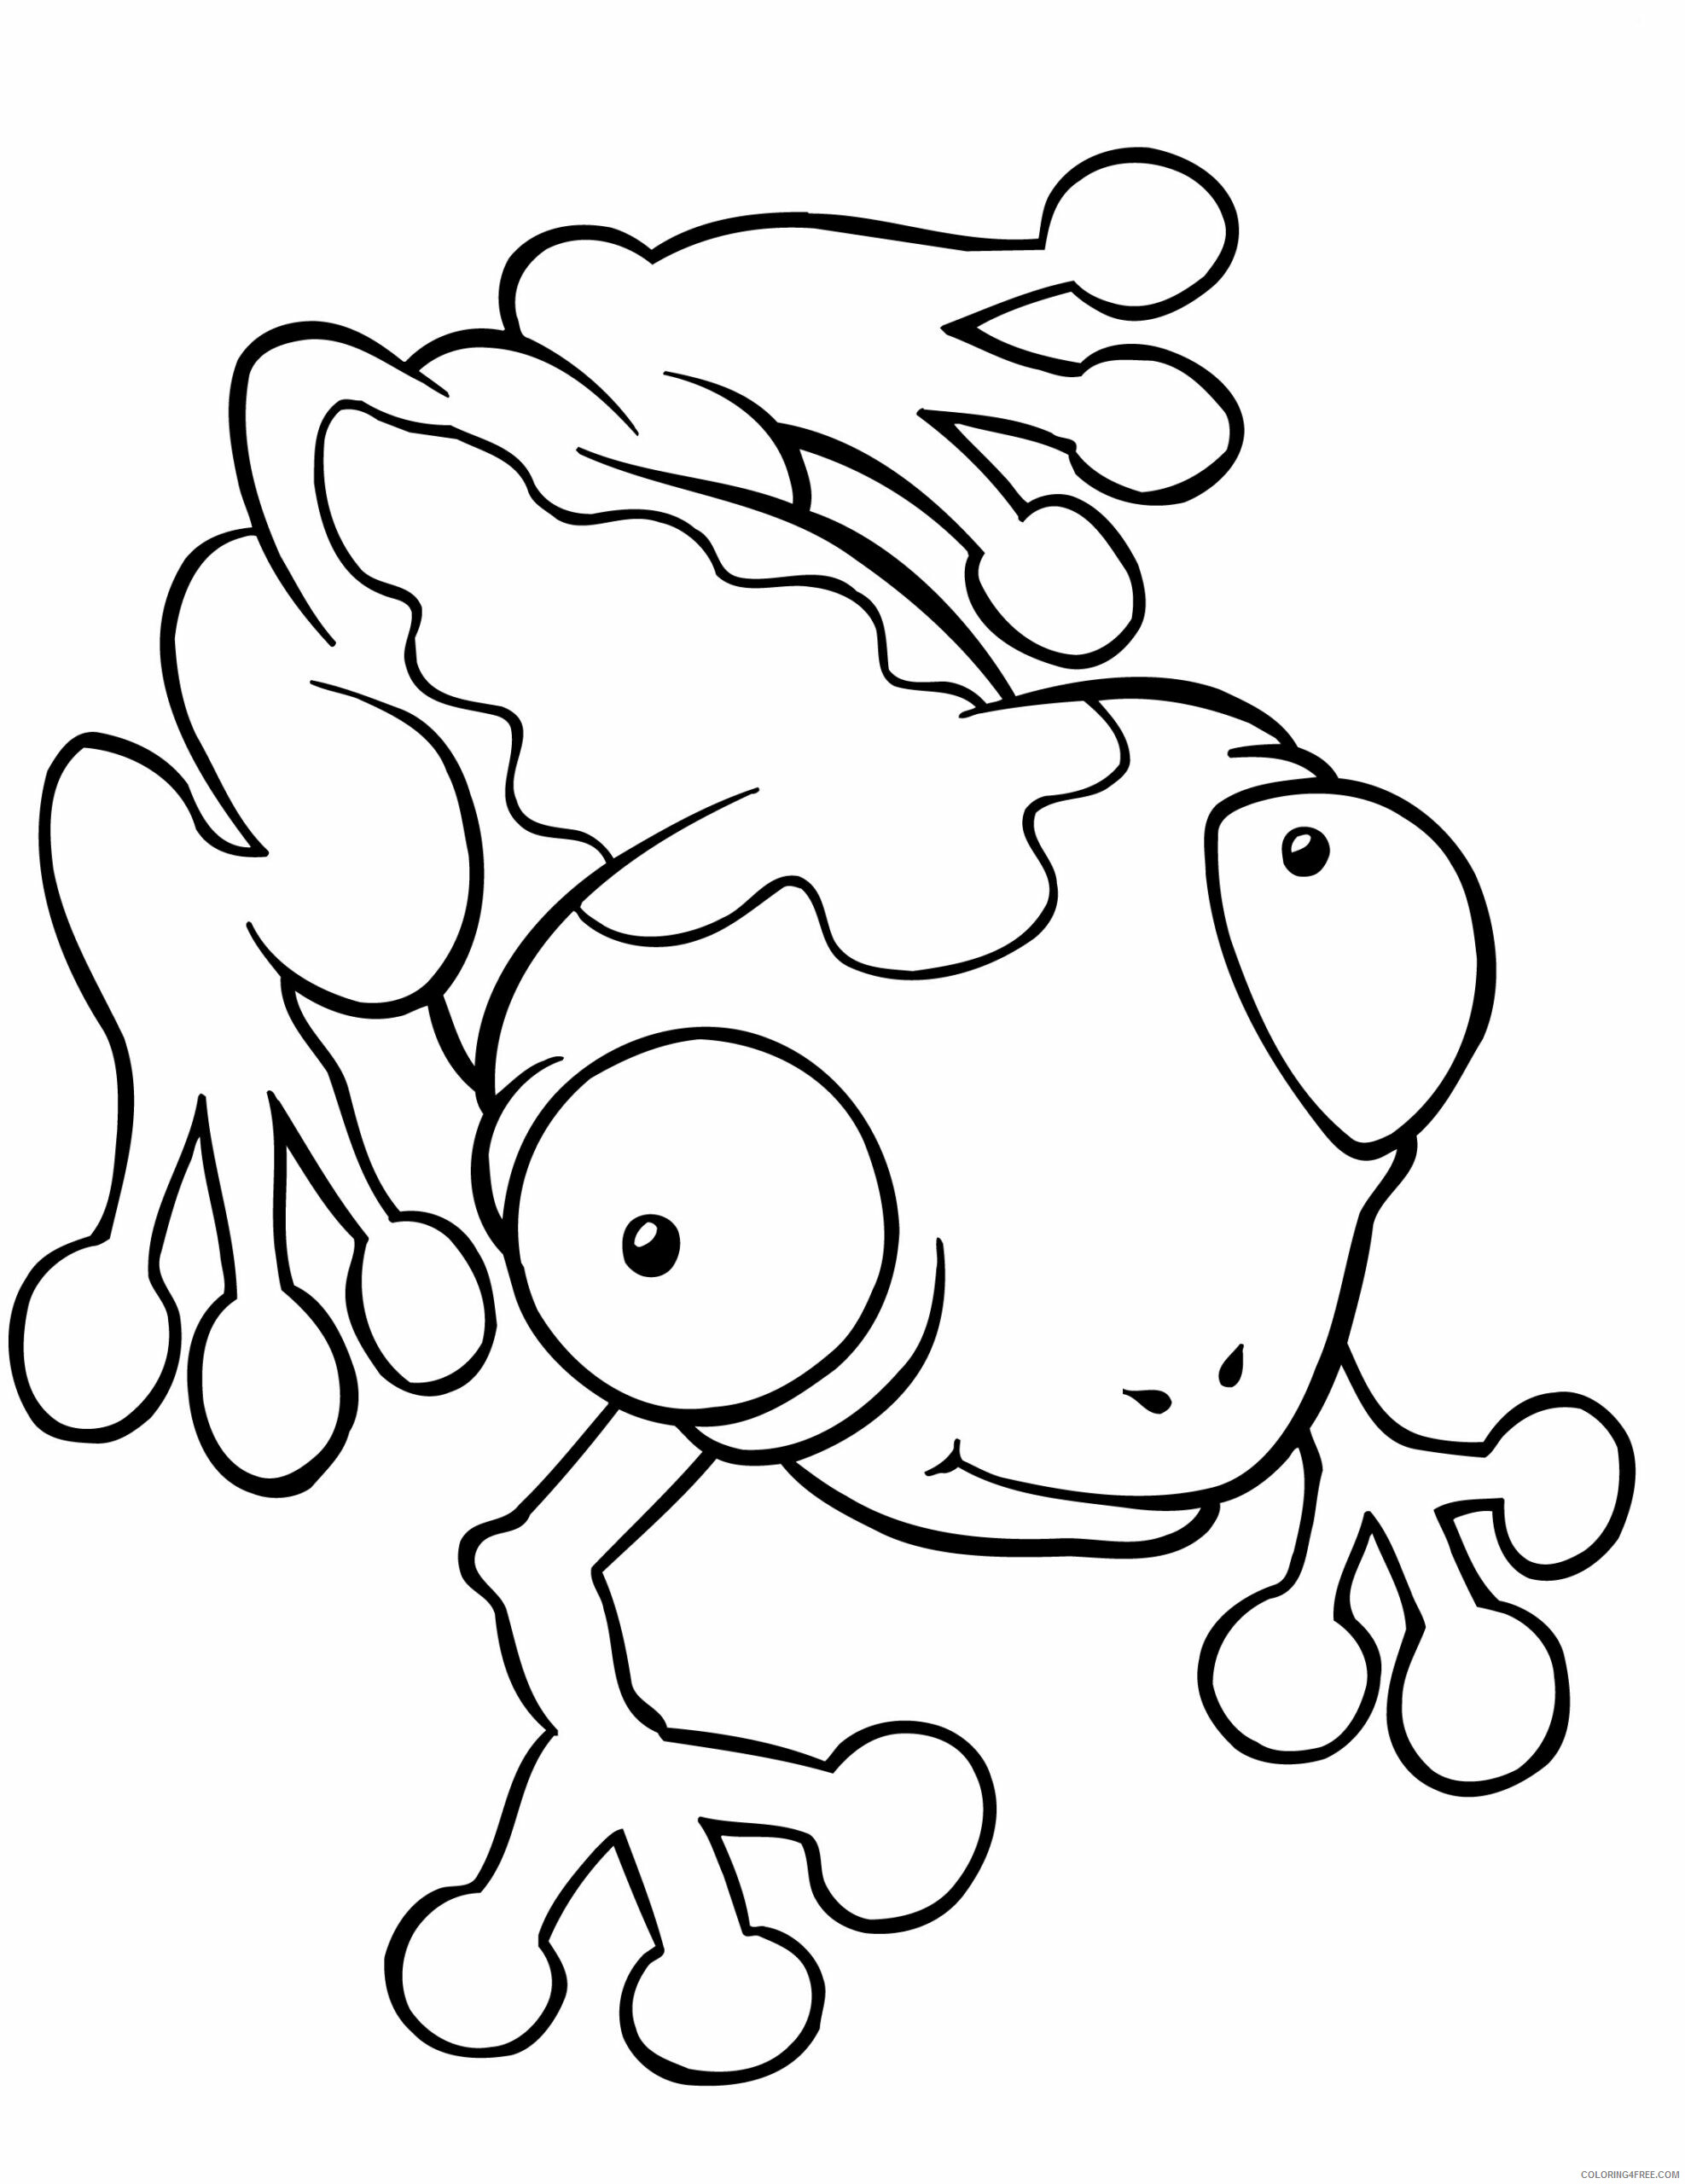 Frog Coloring Pages Animal Printable Sheets Frogs 2021 2329 Coloring4free